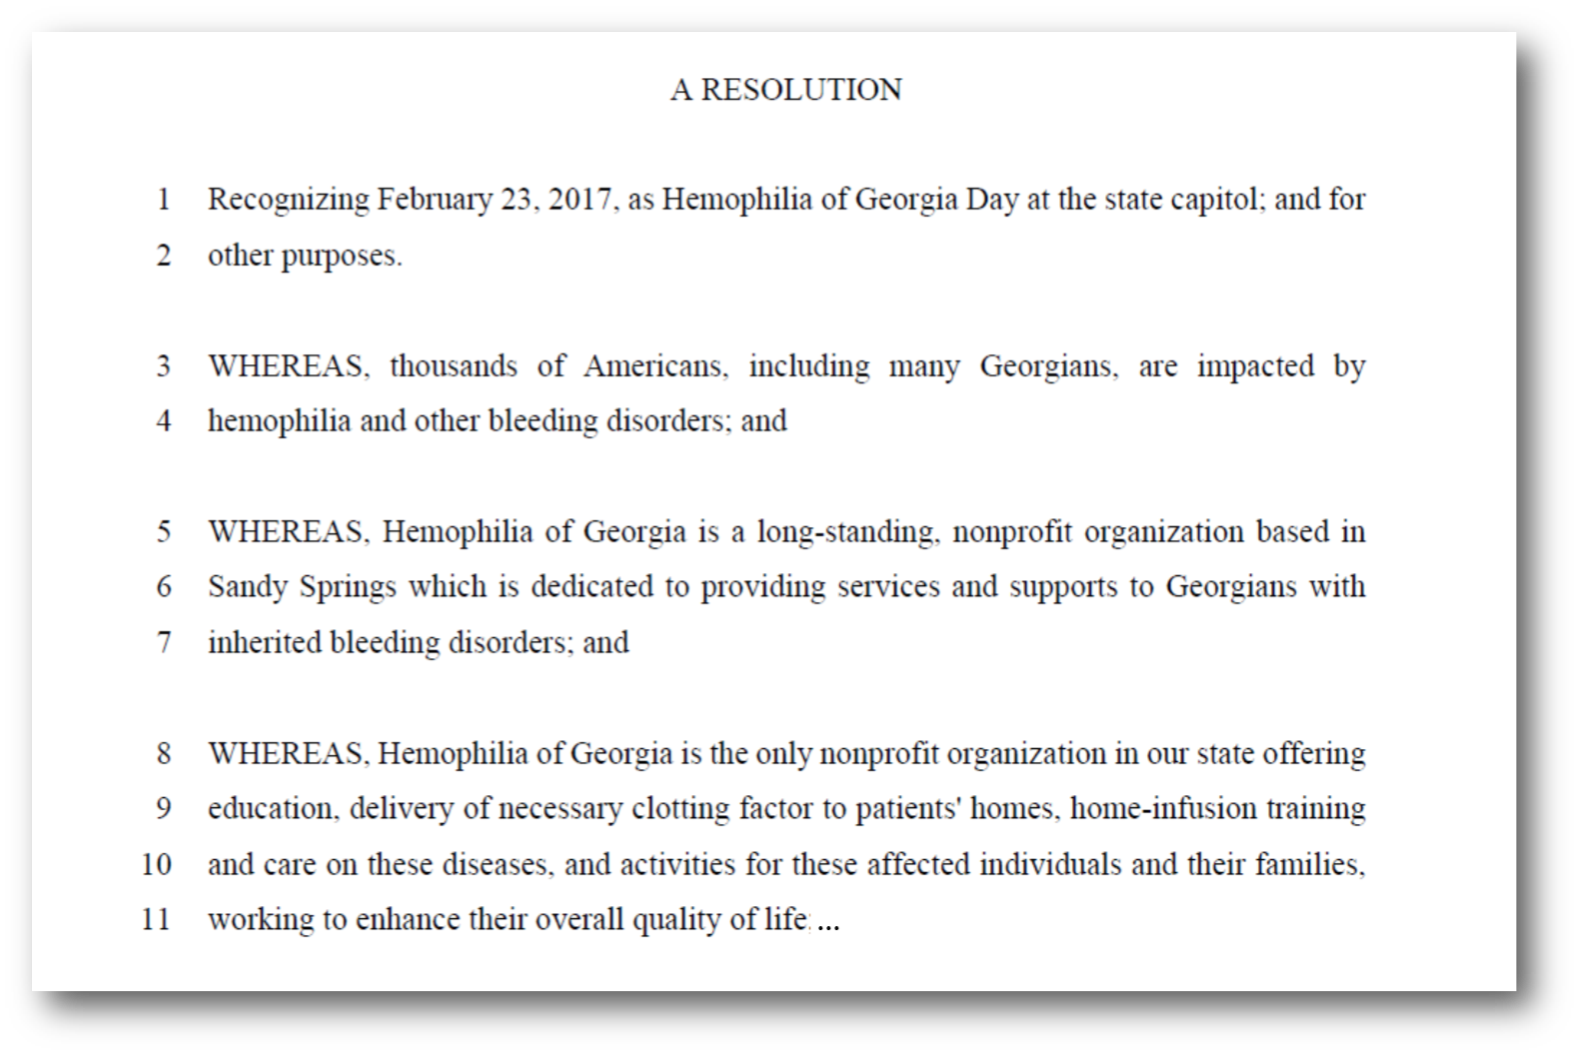 Hemophilia of Georgia Day at the State Capitol Resolution2